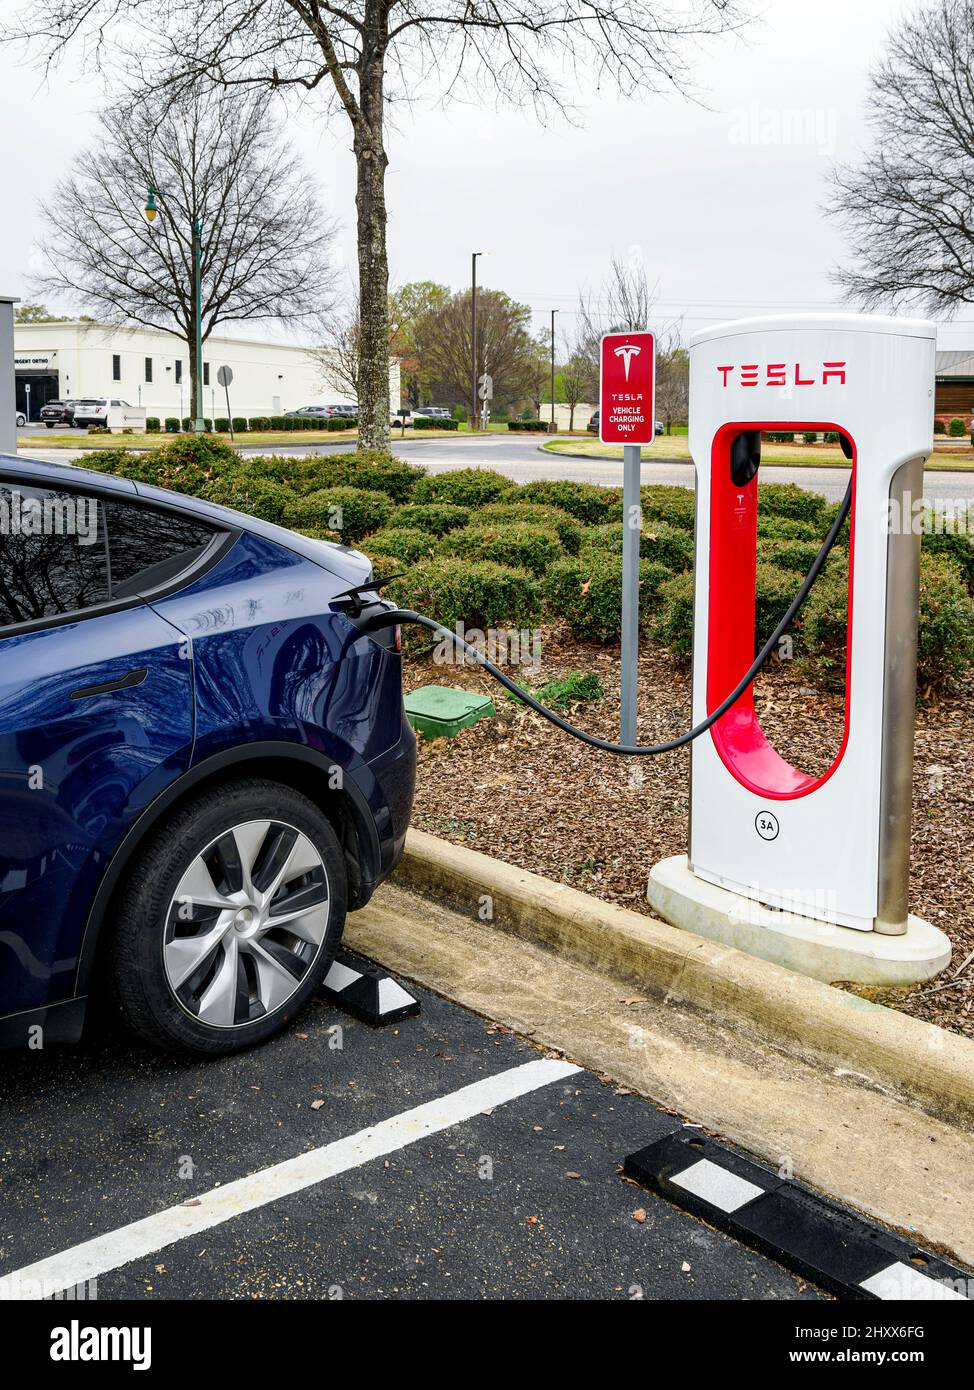 Blue Tesla Model Y, parked and charging at an electric vehicle or electric car charging station in a parking lot in Montgomery Alabama, USA. Stock Photo